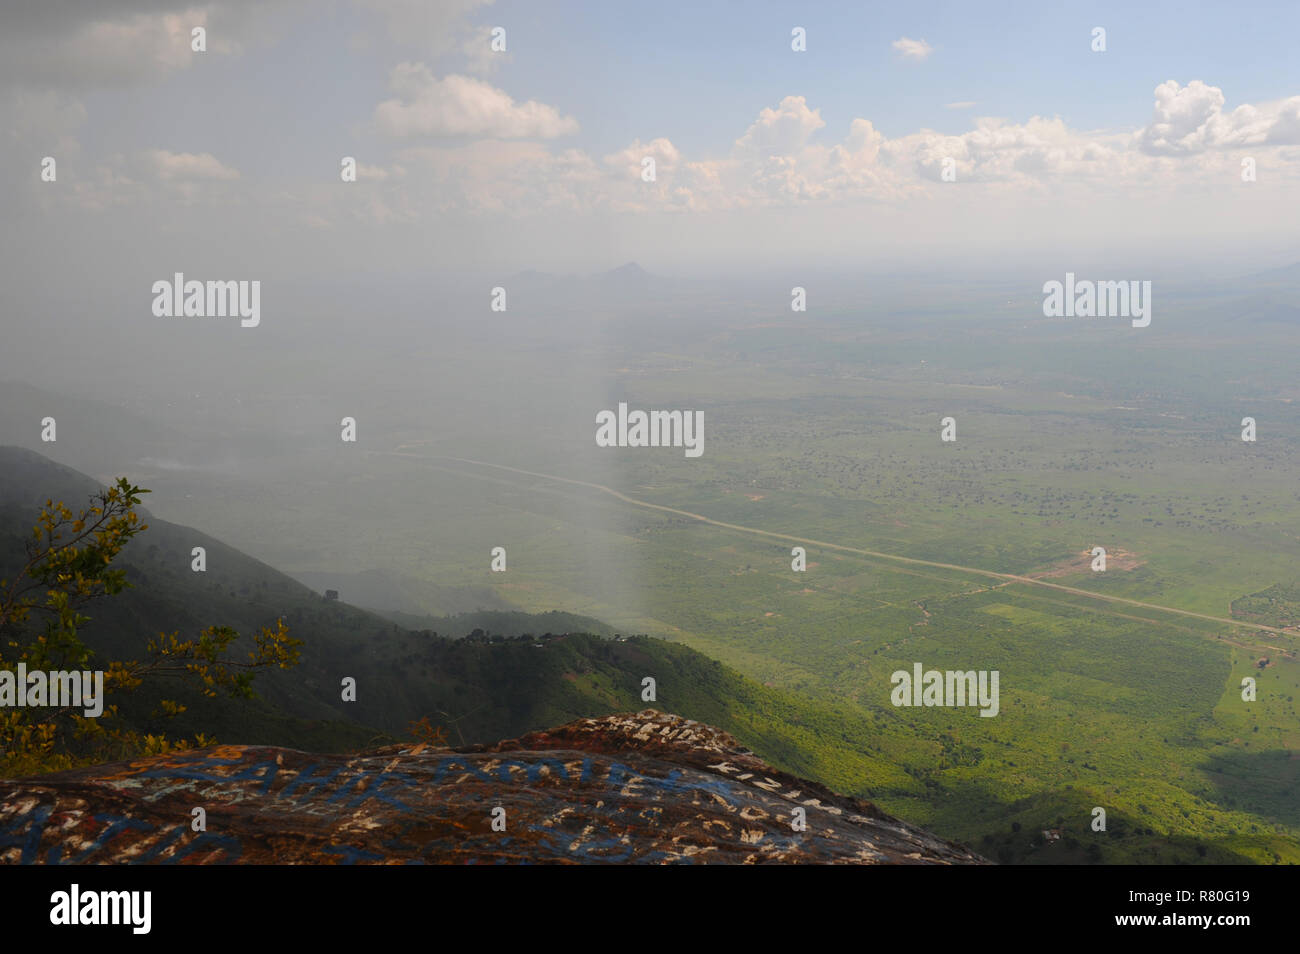 Breathtaking scene of Africa partly in rain taken from Usambara Mountain cliff Lushoto of Great North Road B1 through Mazinde-Mombo towns and Manyara. Stock Photo